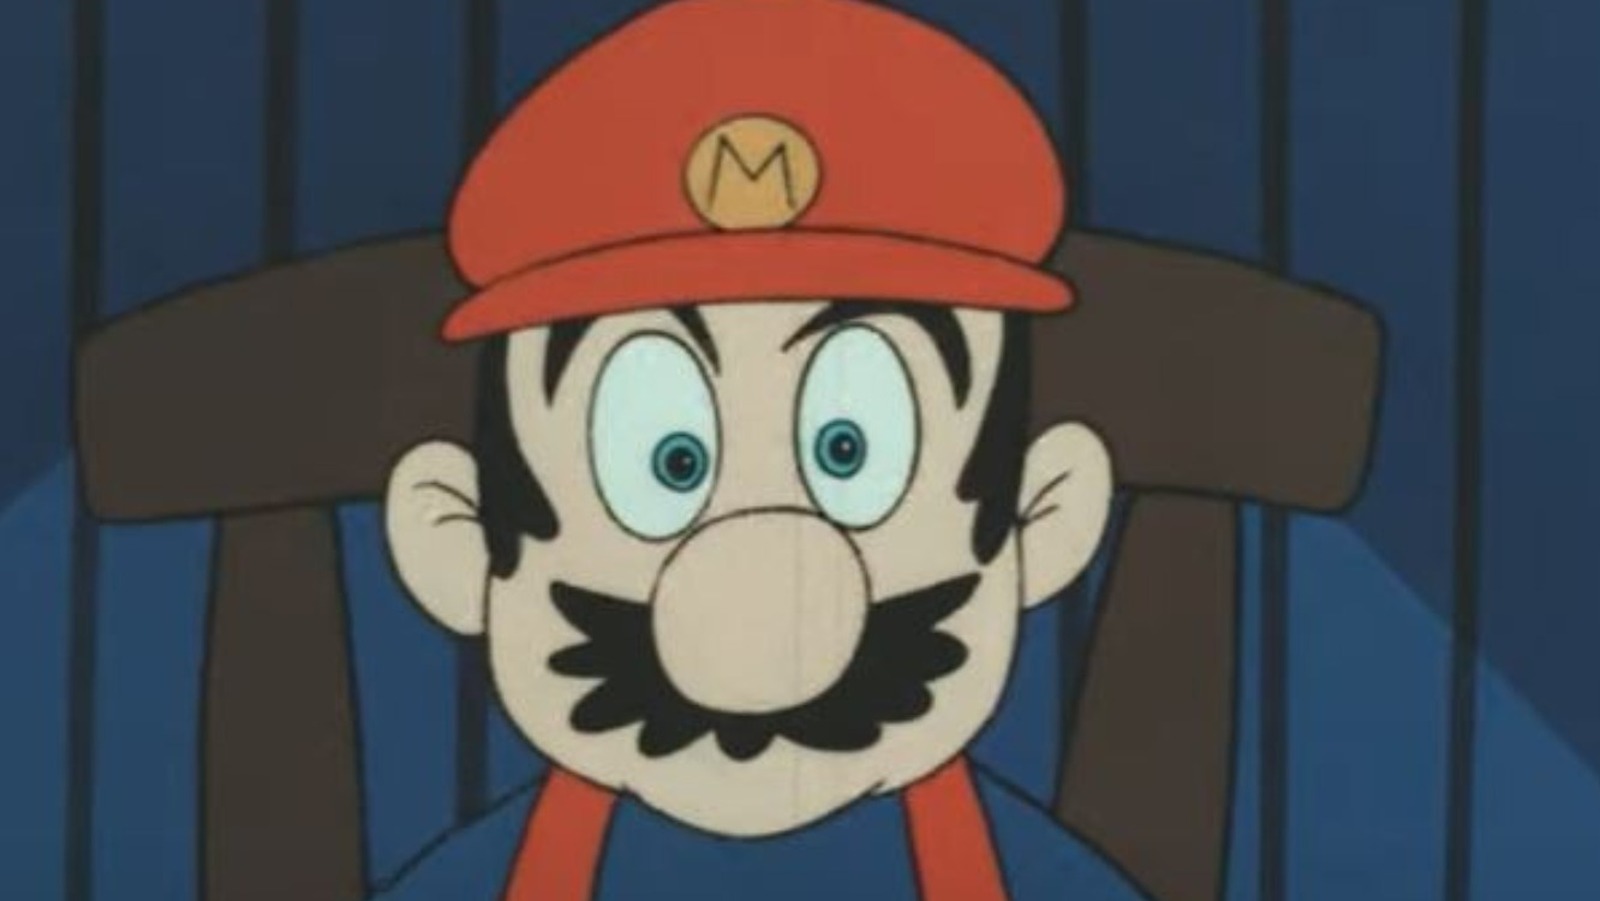 Super Mario Bros Animated Movie from 1986 Gets Restored in 4K